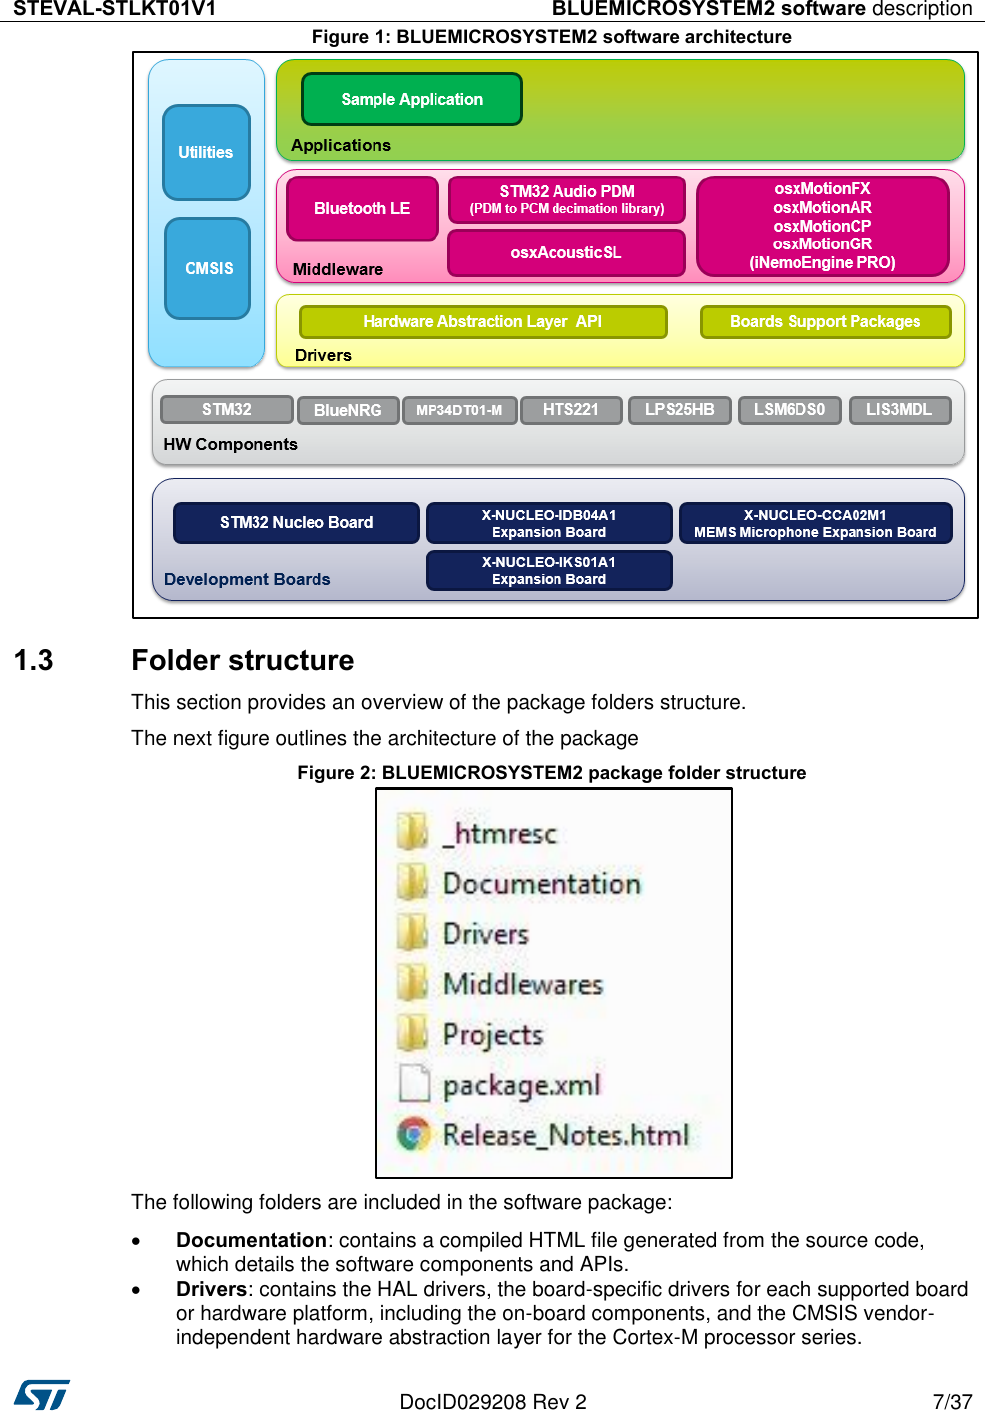 STEVAL-STLKT01V1 BLUEMICROSYSTEM2 software description   DocID029208 Rev 2 7/37  Figure 1: BLUEMICROSYSTEM2 software architecture  1.3  Folder structure This section provides an overview of the package folders structure.  The next figure outlines the architecture of the package Figure 2: BLUEMICROSYSTEM2 package folder structure  The following folders are included in the software package:   Documentation: contains a compiled HTML file generated from the source code, which details the software components and APIs.  Drivers: contains the HAL drivers, the board-specific drivers for each supported board or hardware platform, including the on-board components, and the CMSIS vendor-independent hardware abstraction layer for the Cortex-M processor series. 